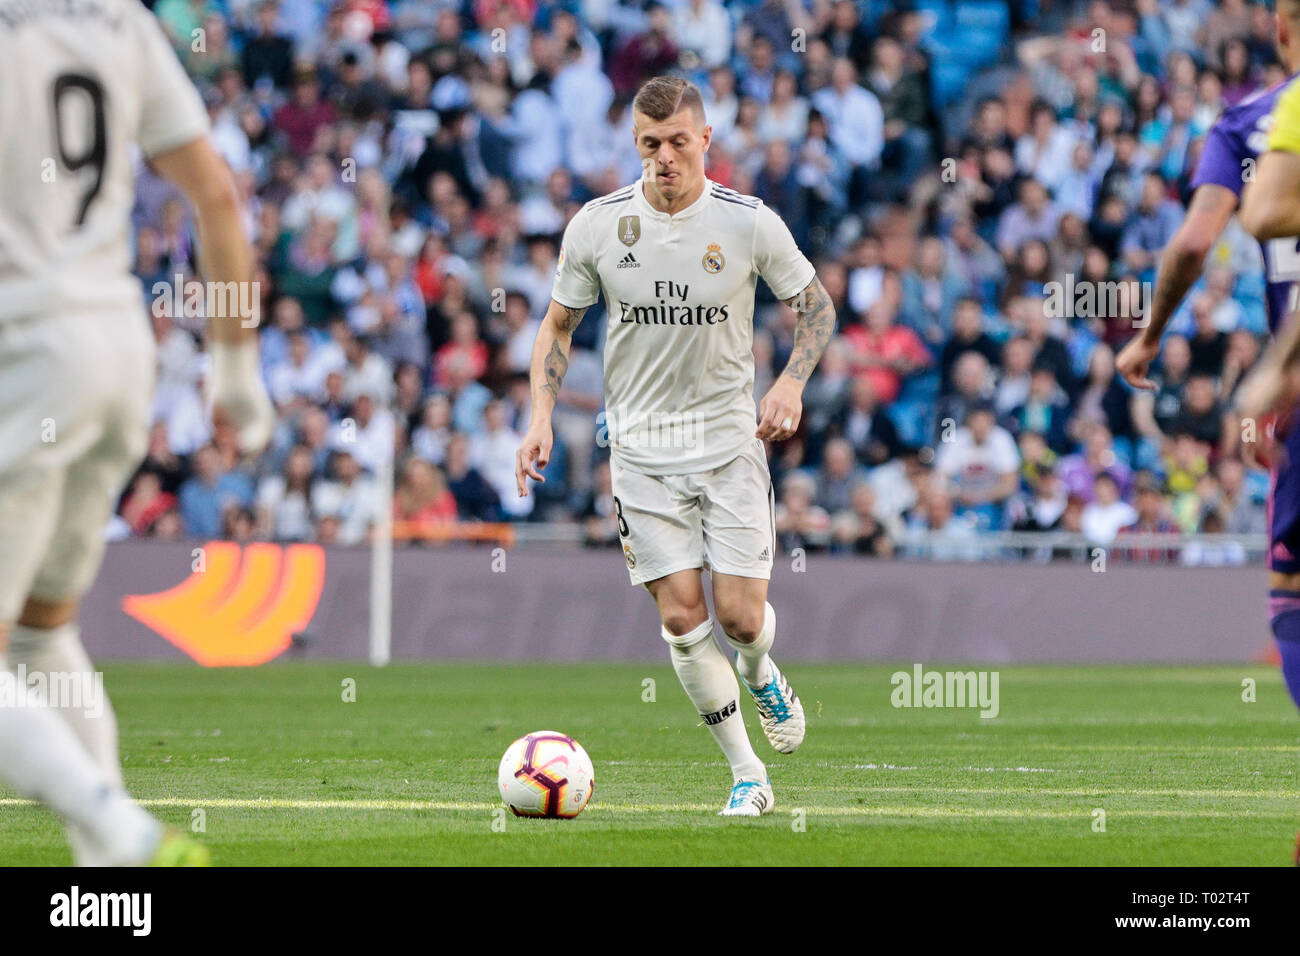 Madrid, Spain. 16th March 2019. Real Madrid's Toni Kroos seen in action during La Liga match between Real Madrid and Real Club Celta de Vigo at Santiago Bernabeu Stadium in Madrid, Spain. Credit: SOPA Images Limited/Alamy Live News Stock Photo